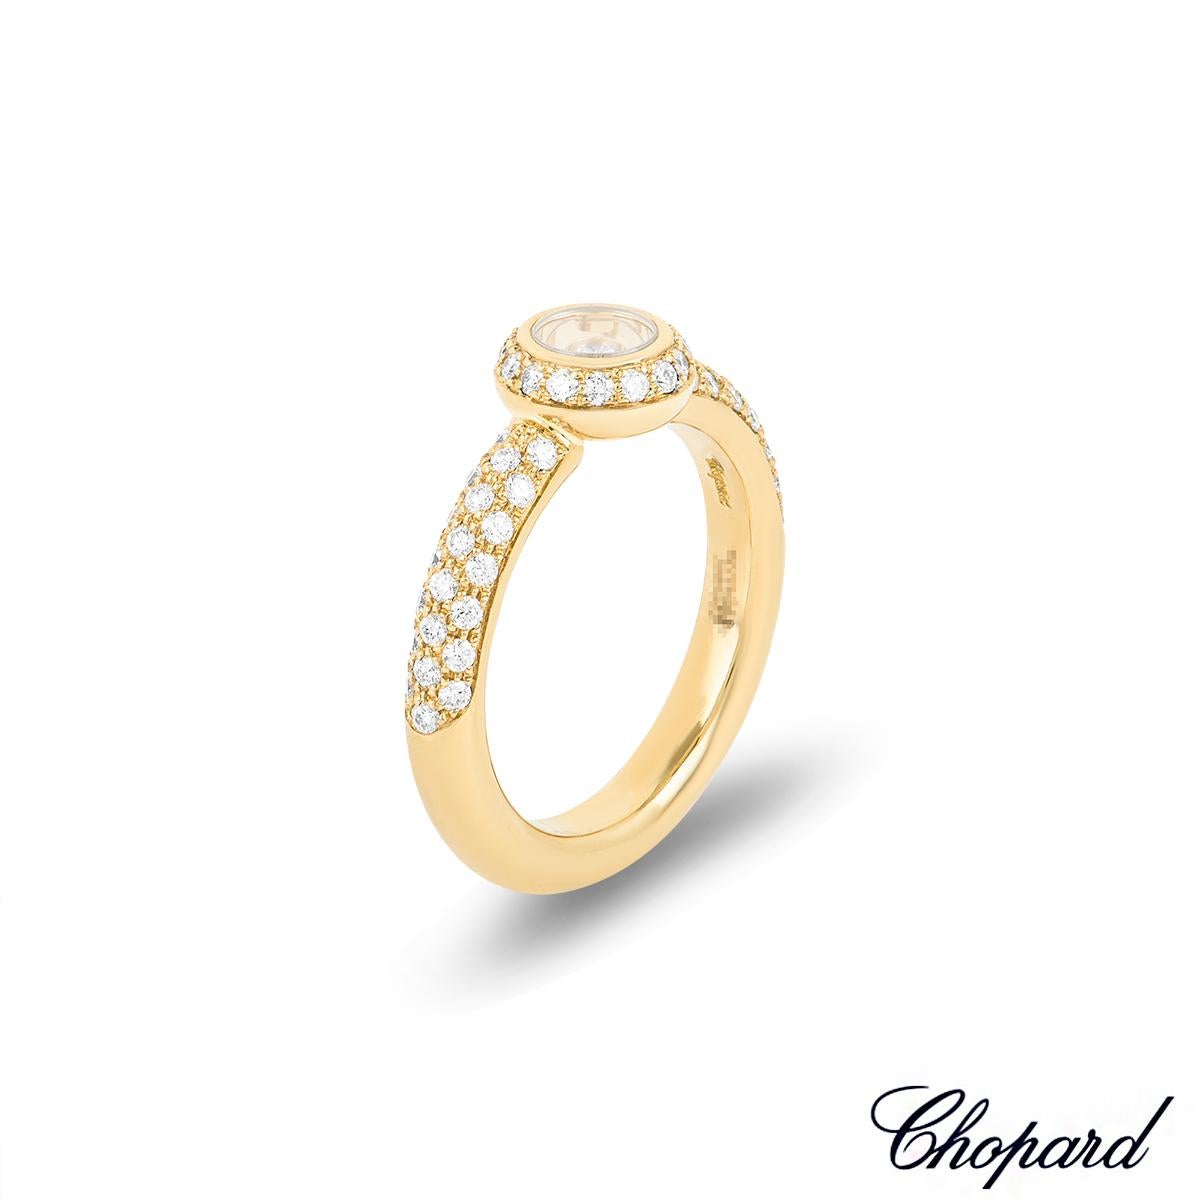 A sparkly 18k yellow gold Happy Diamonds ring by Chopard. The ring features a circular motif set to the centre with a halo of 15 round brilliant cut diamonds with an approximate weight of 0.13ct. In the centre of the circular motif is a single round